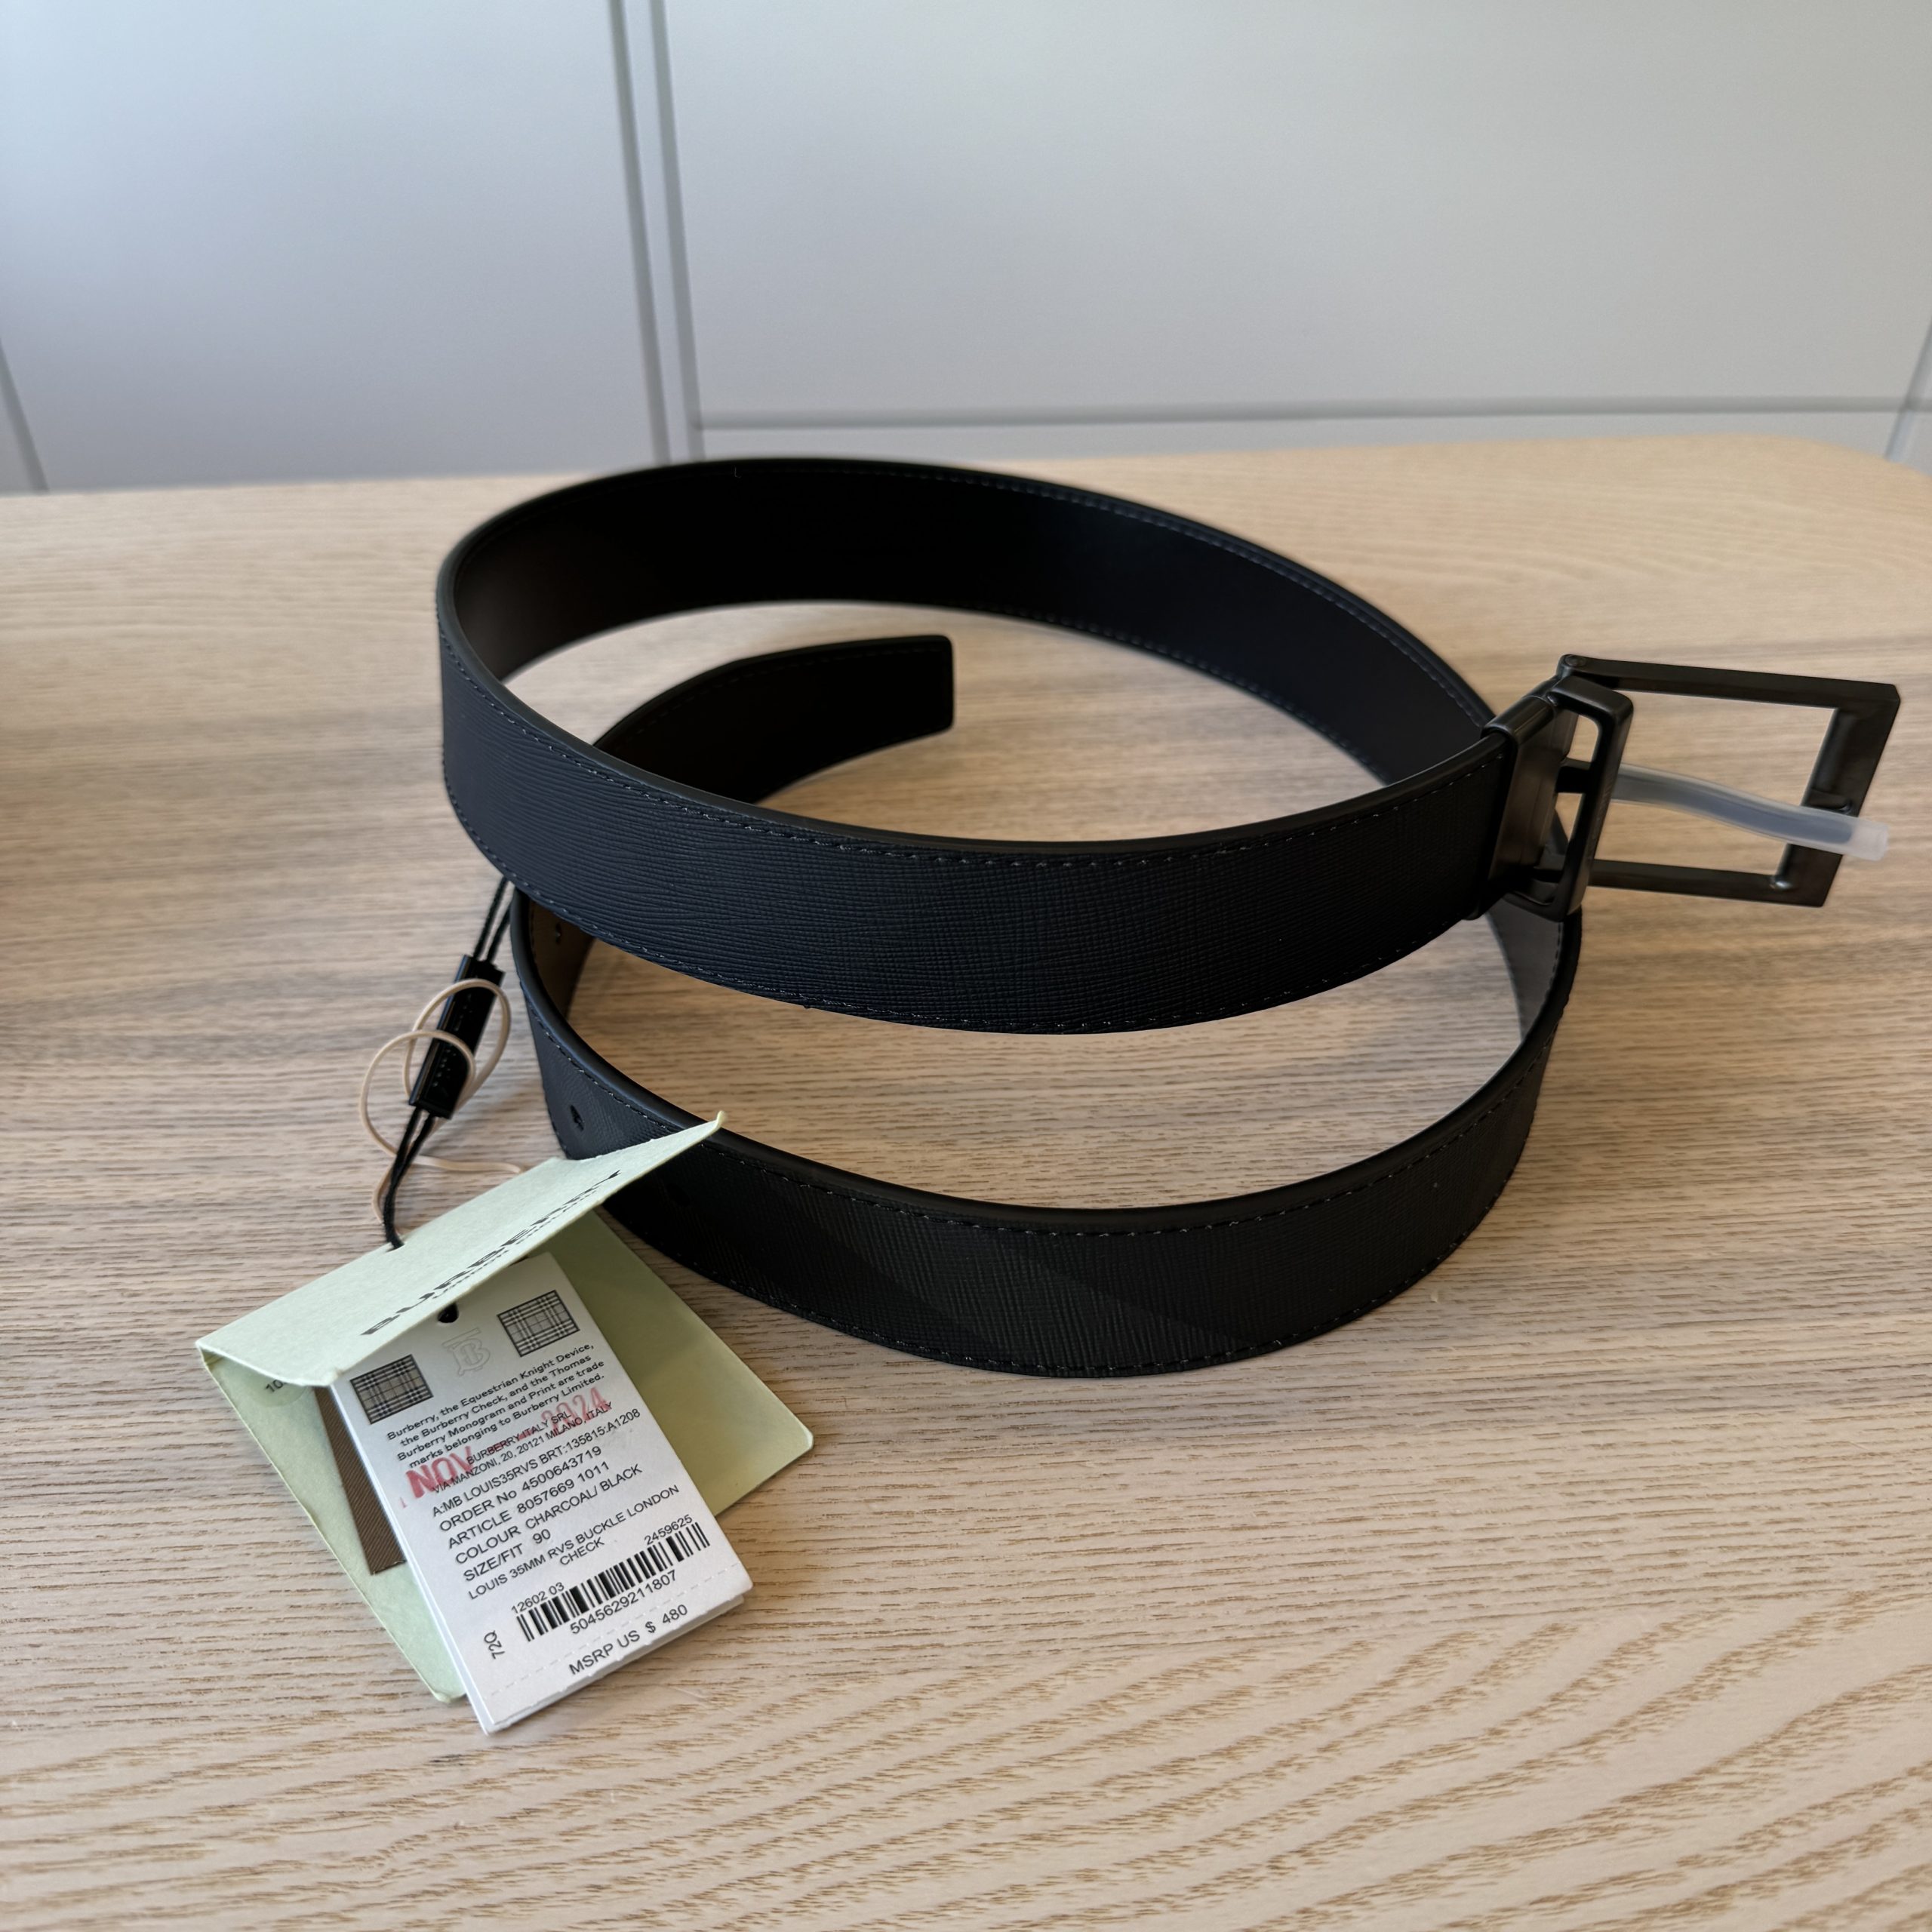 Check and Leather Belt in Charcoal/silver